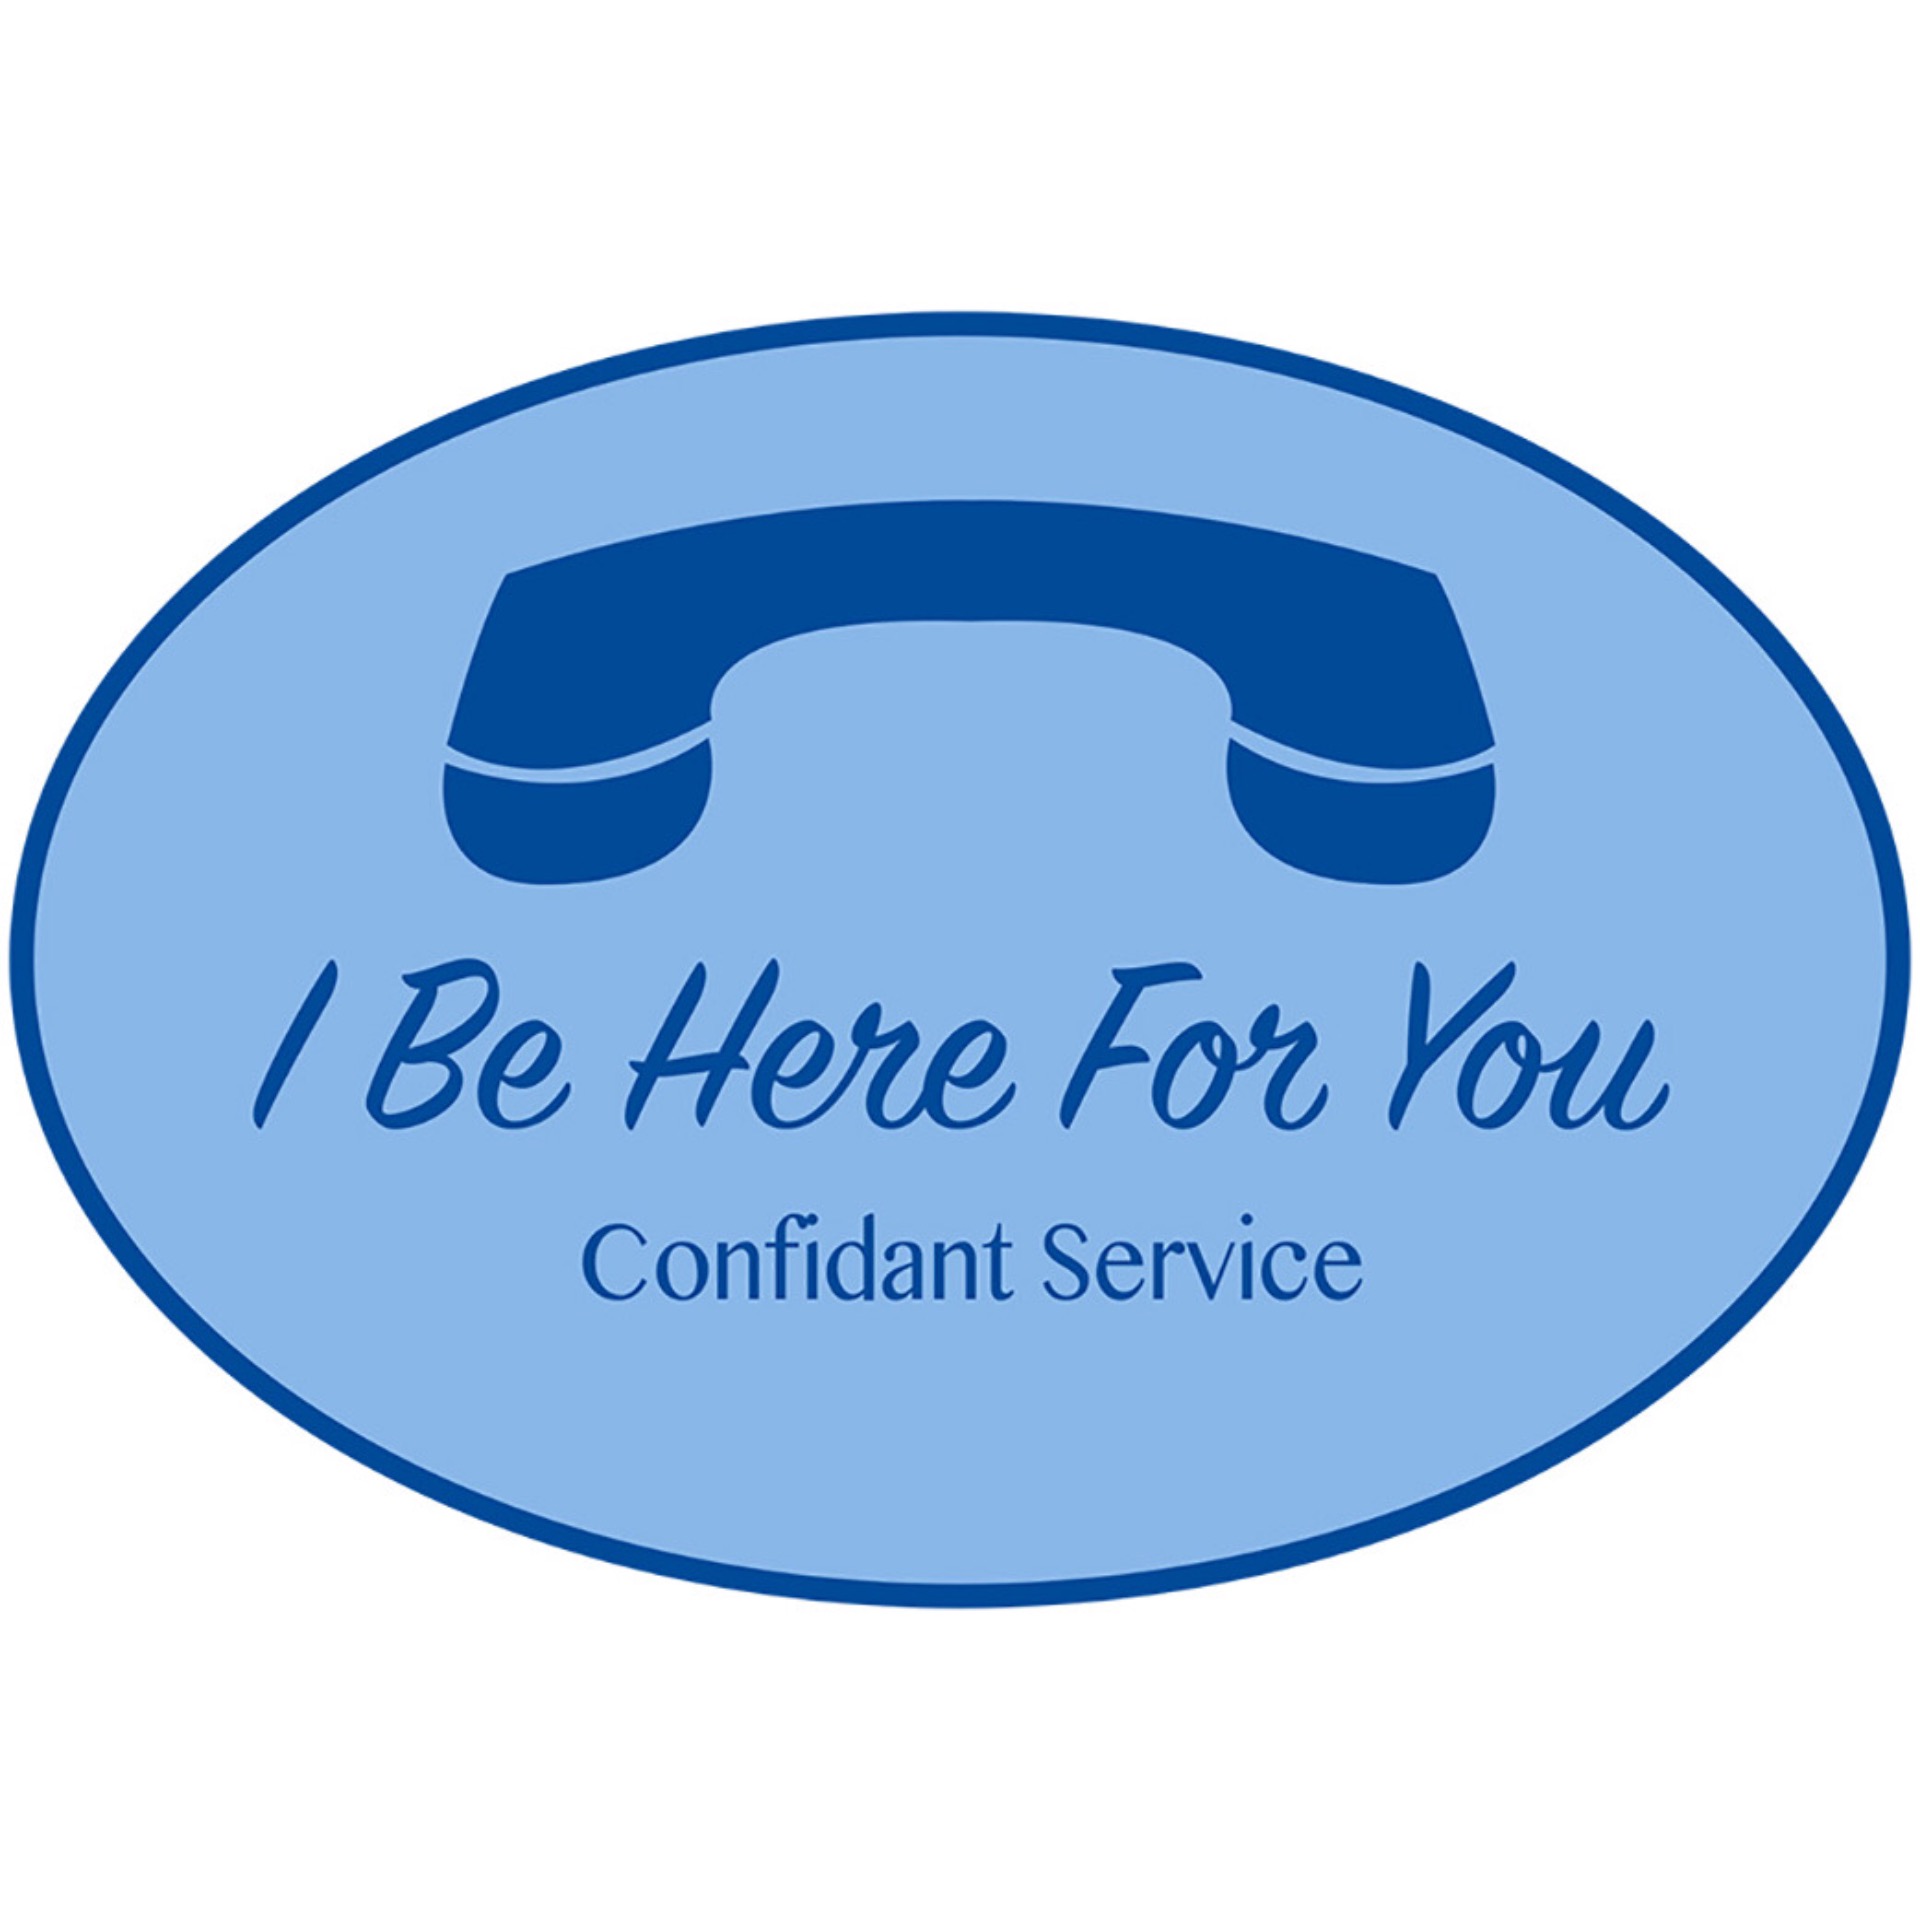 I Be Here For You-Confidant Service 